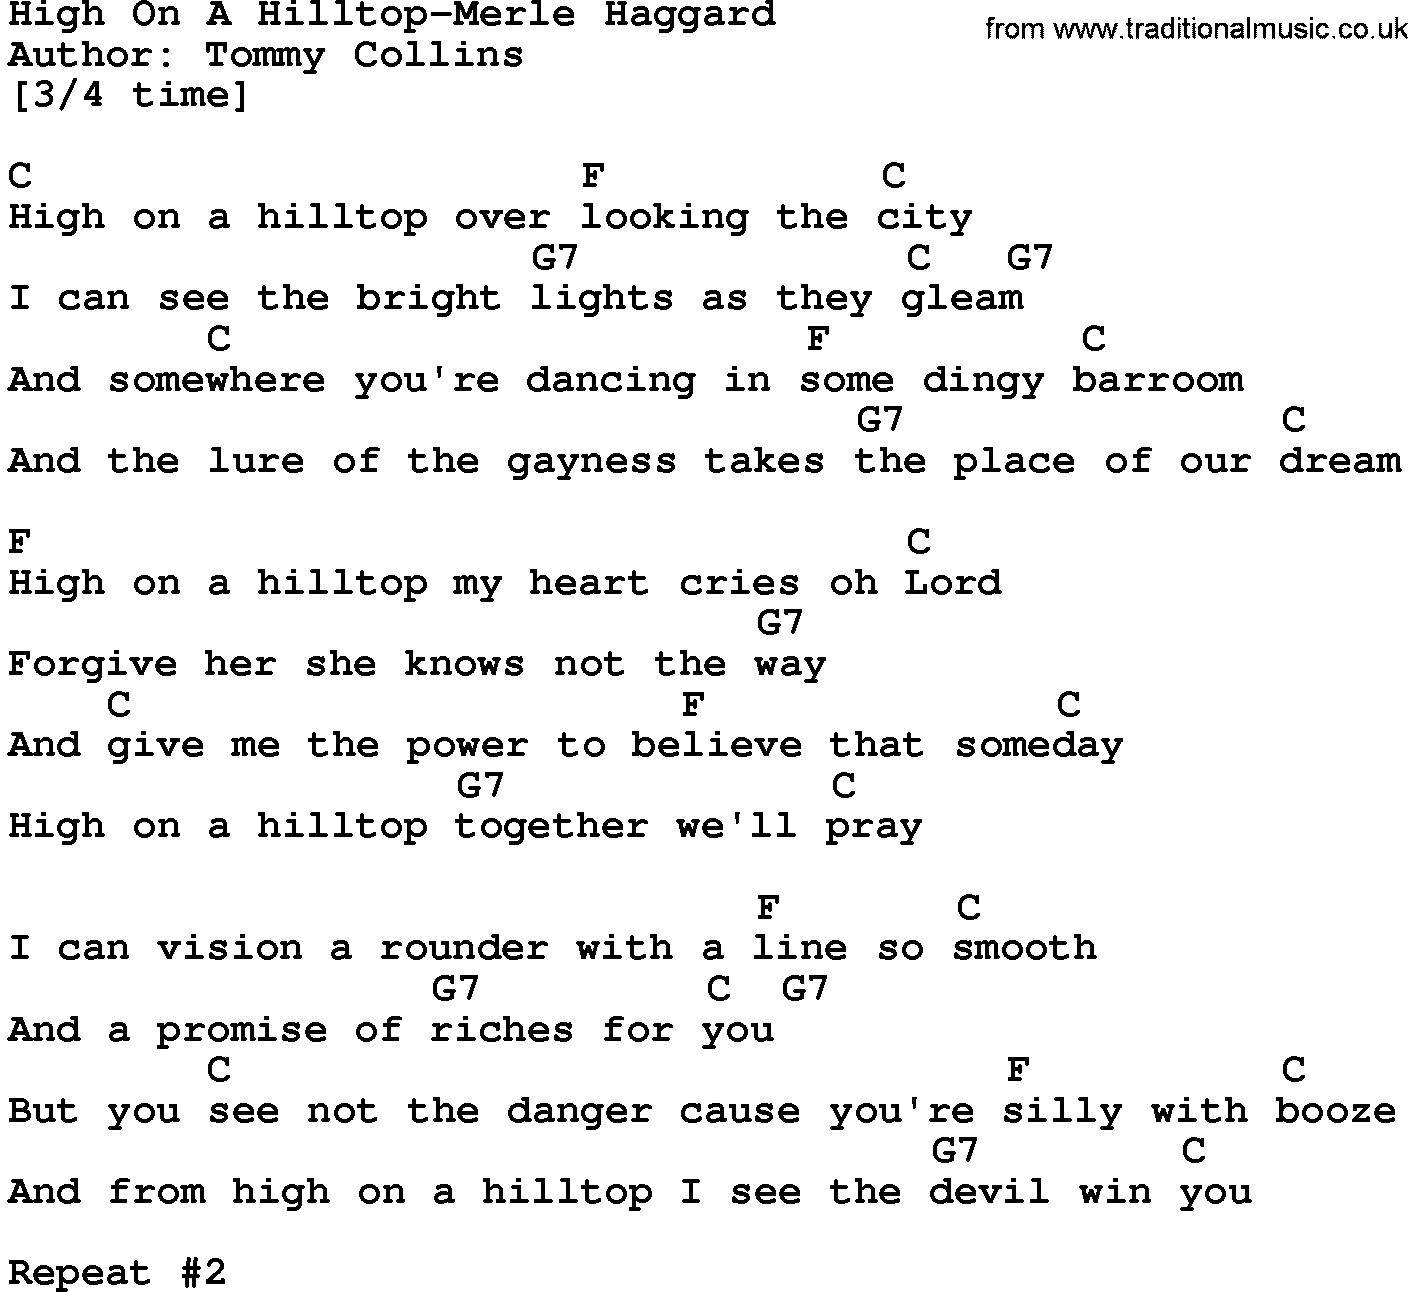 Country music song: High On A Hilltop-Merle Haggard lyrics and chords